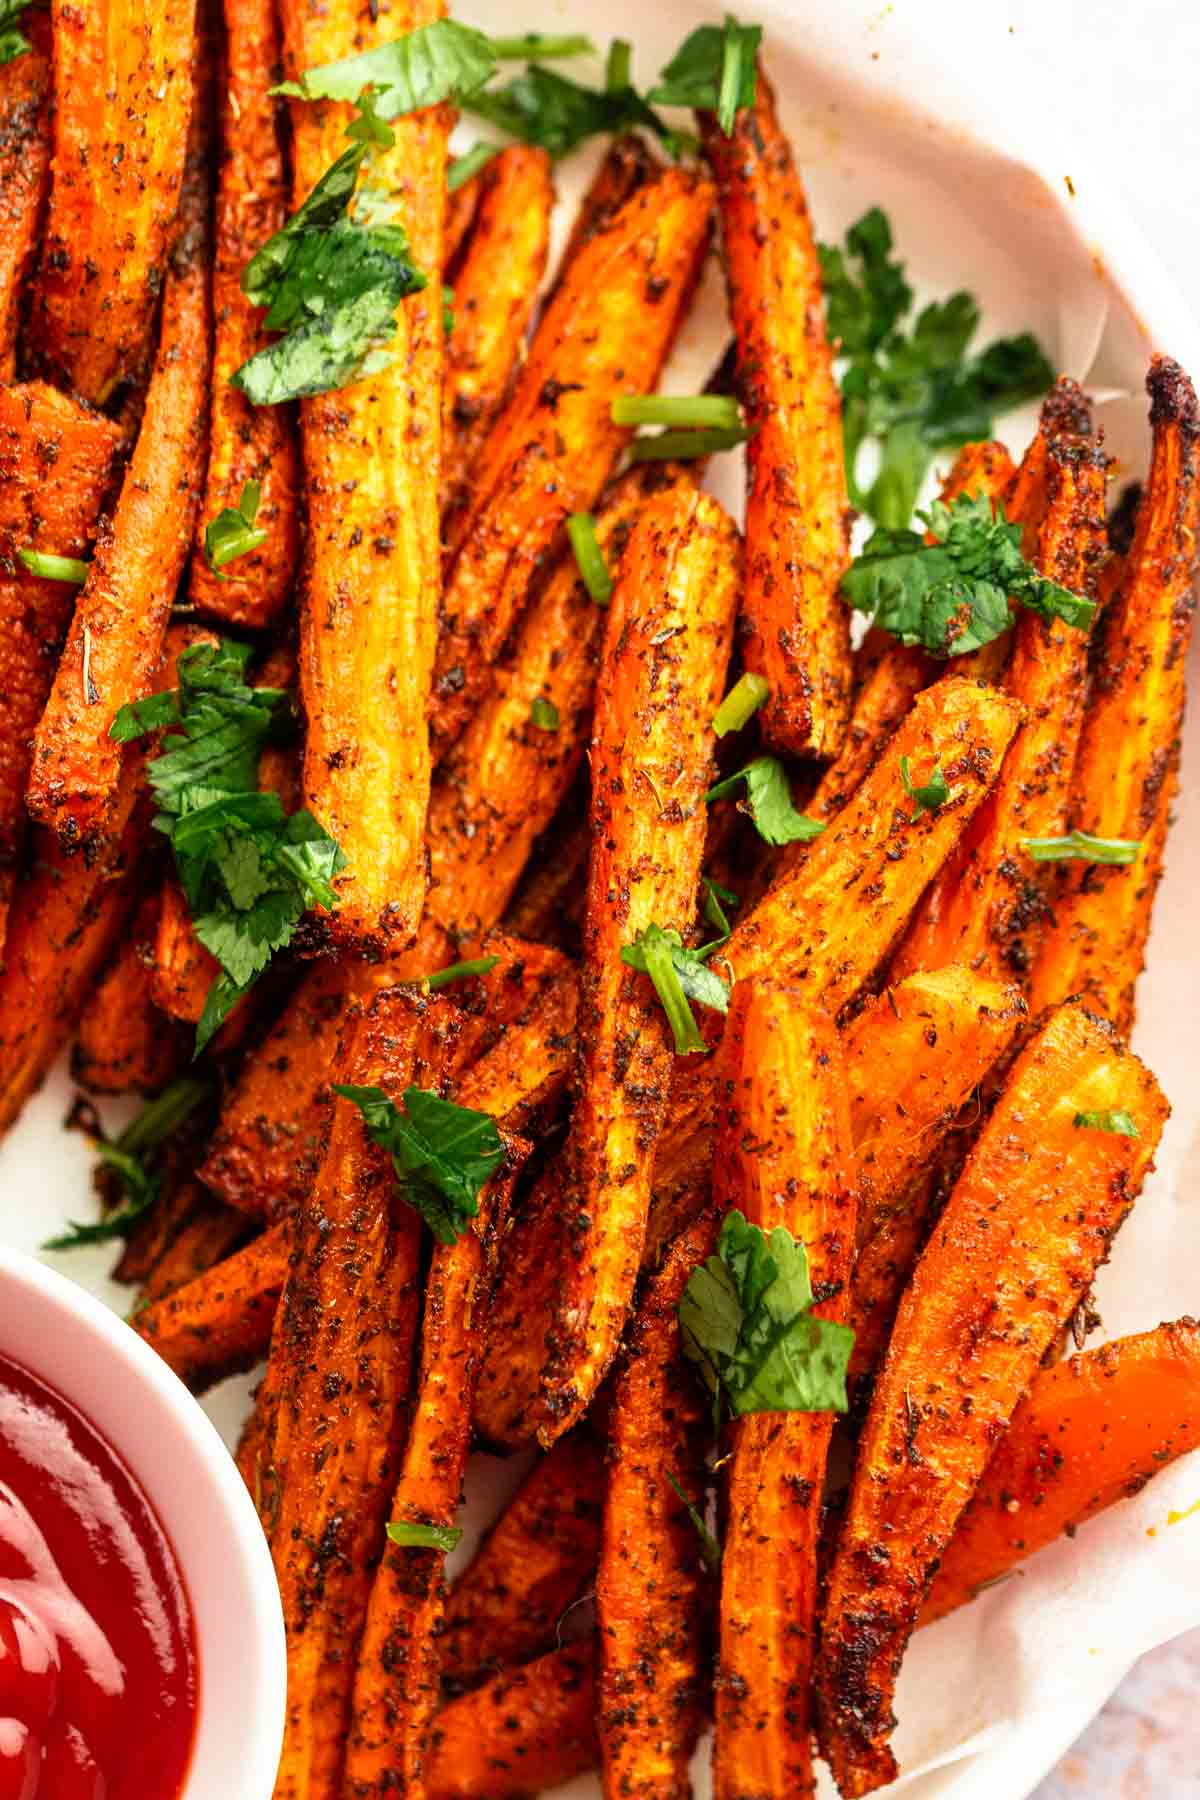 Super close up of carrot fries.